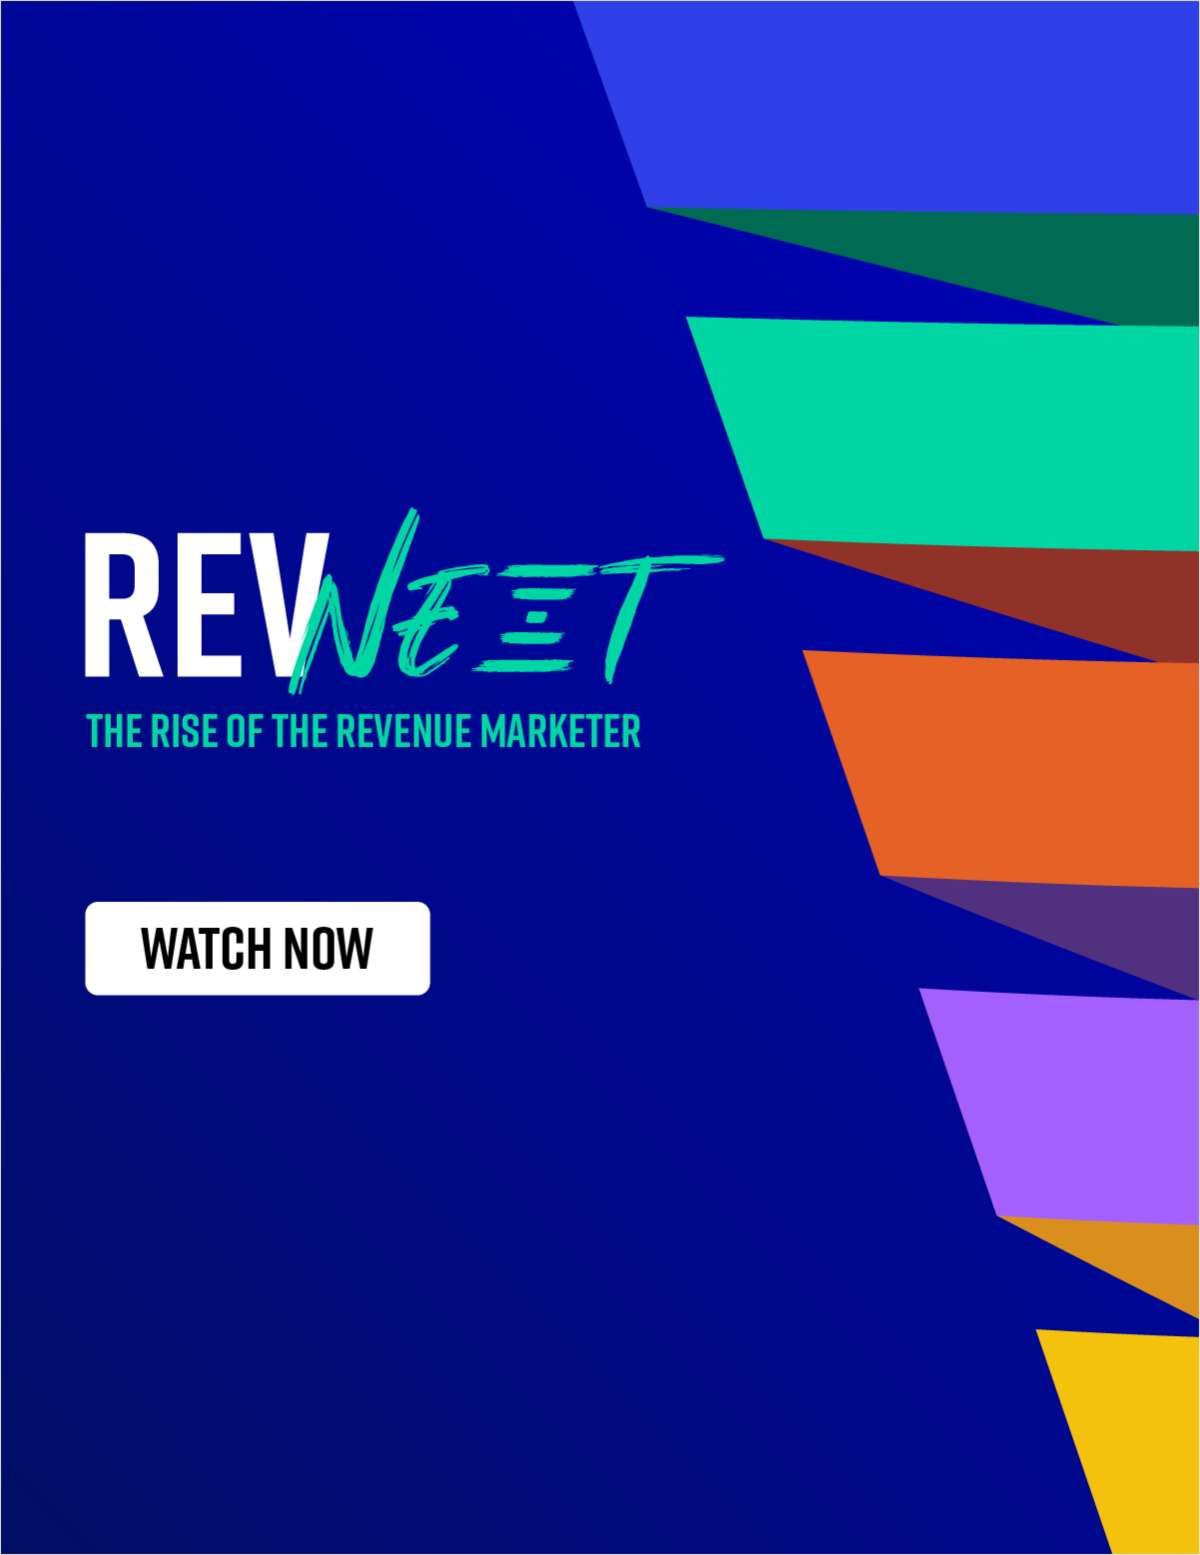 RevNEXT Summit: The Rise of the Revenue Marketer